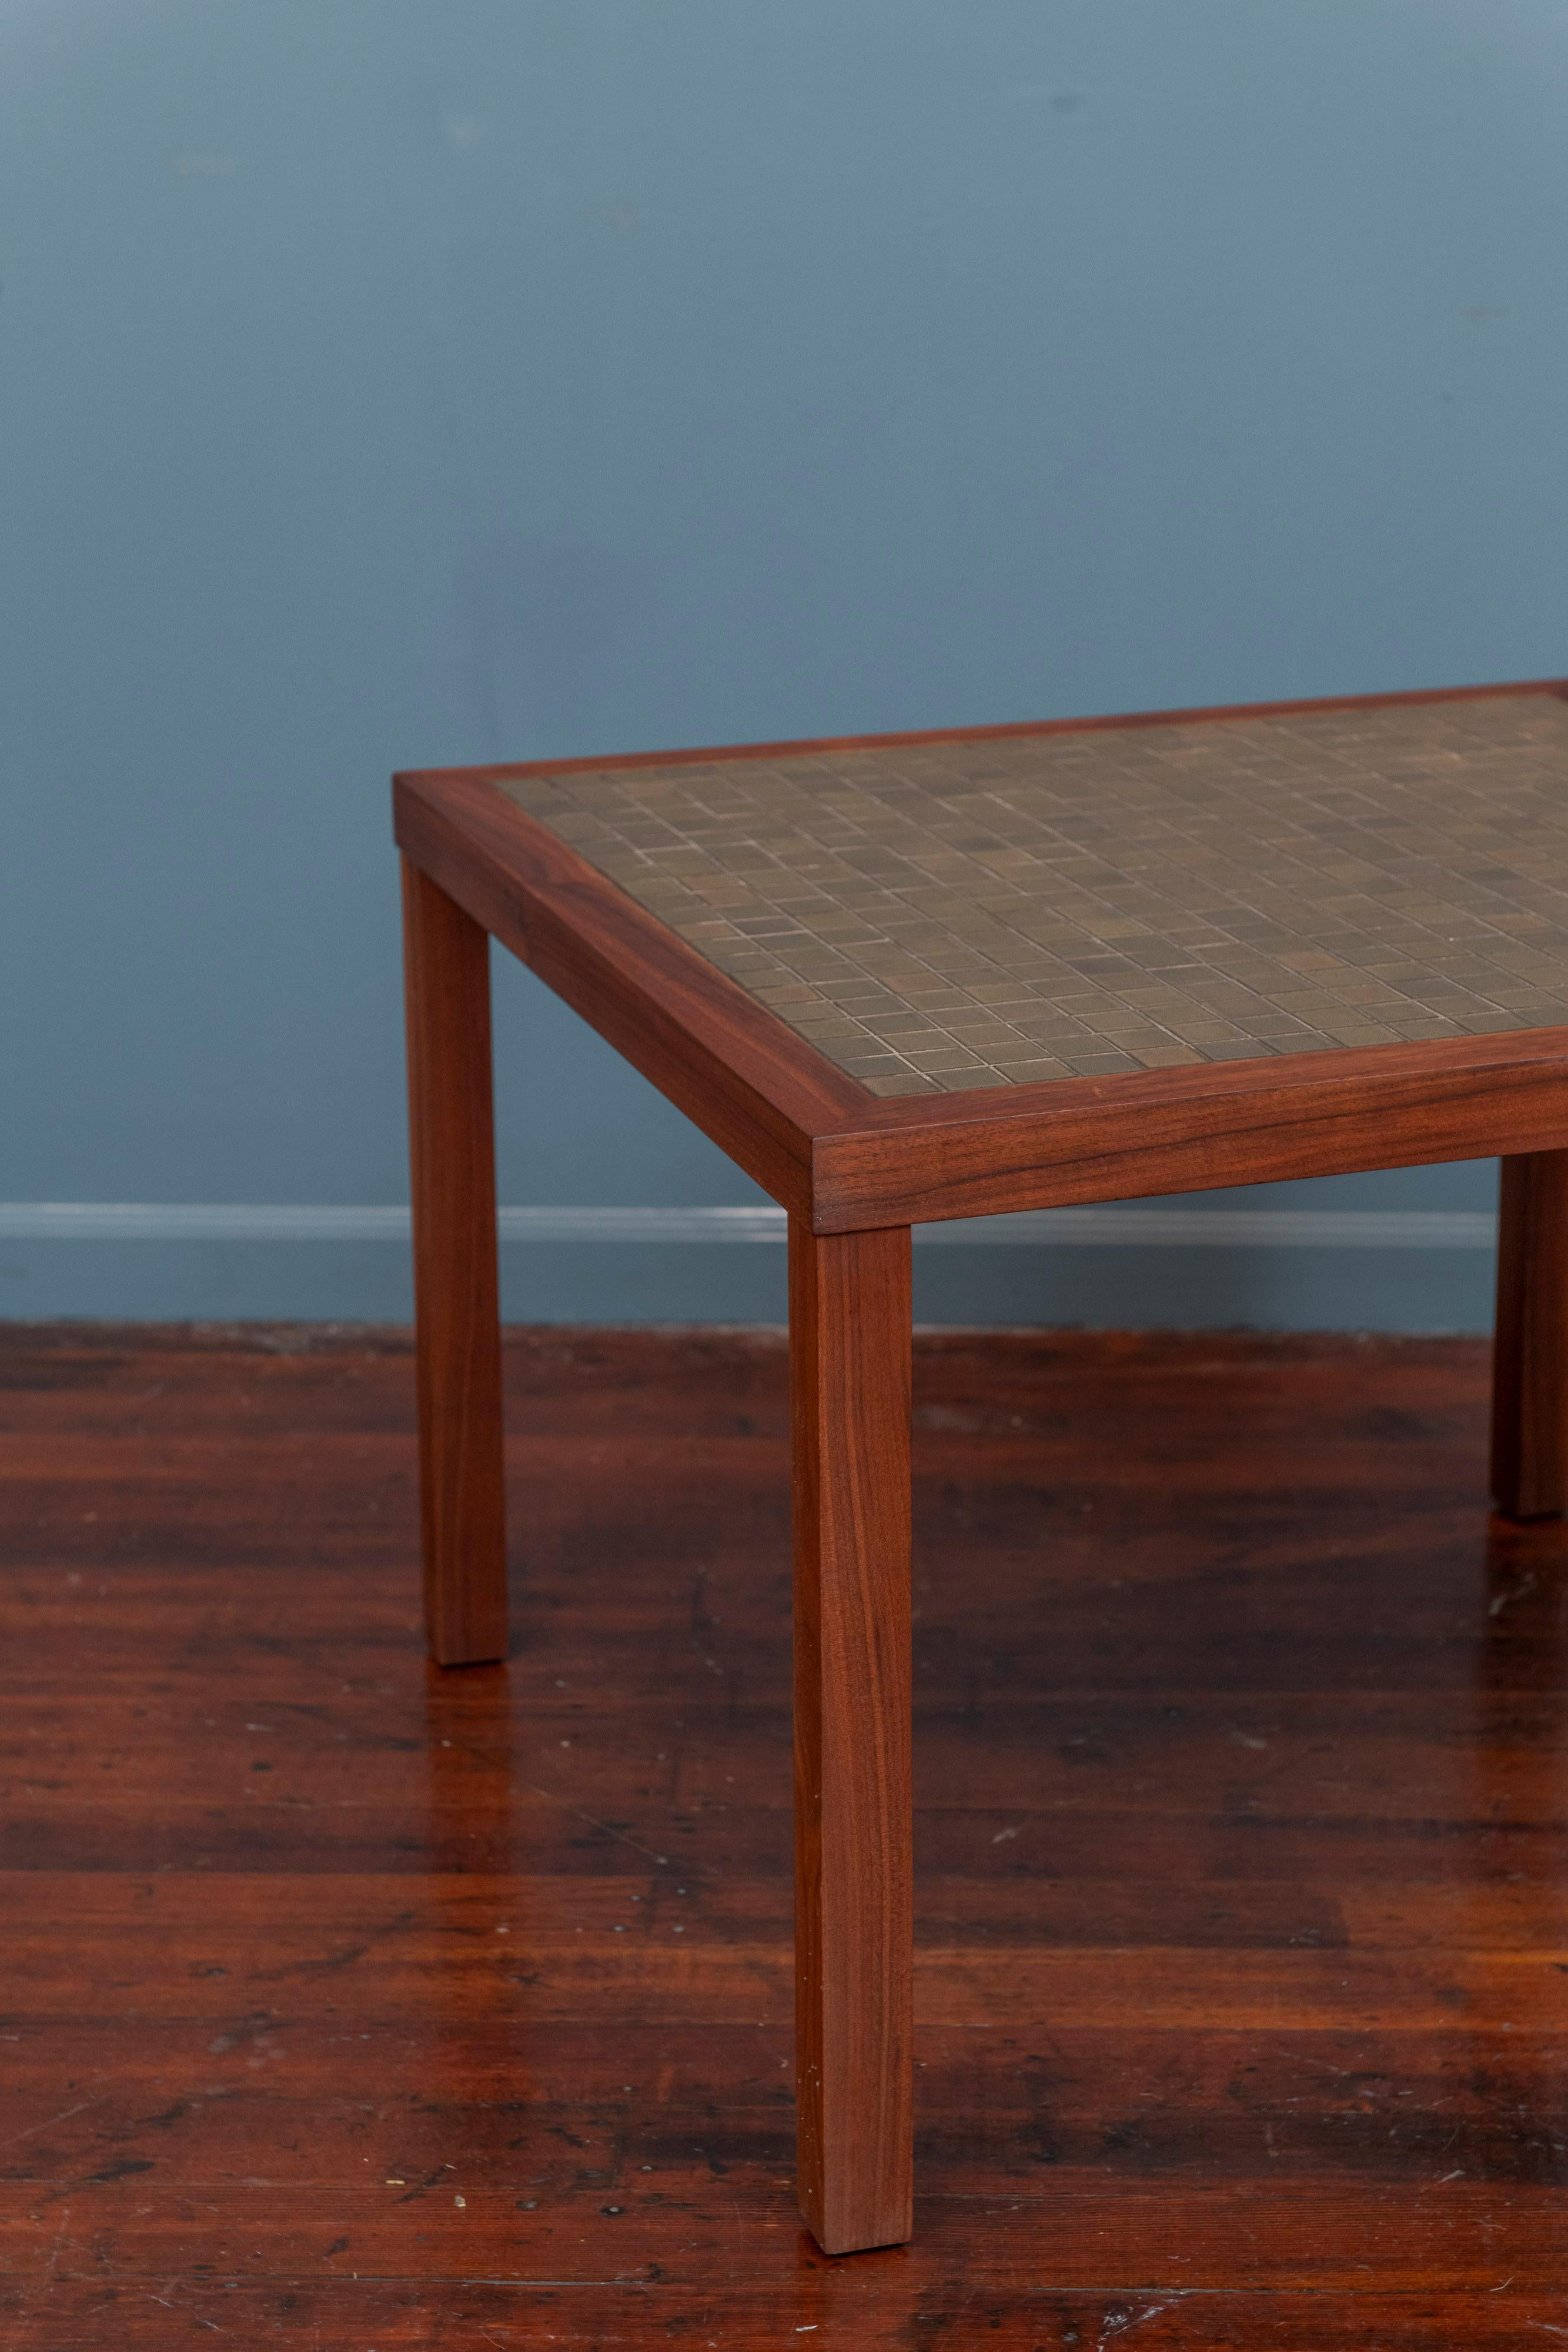 Gordon & Jane Martz design tile top end table for Marshall Studios, N.Y. Handsome end table in a solid walnut frame with inlaid avocado colored ceramic tiles. Simple yet sophisticated in its minimalism made with high quality materials and execution,